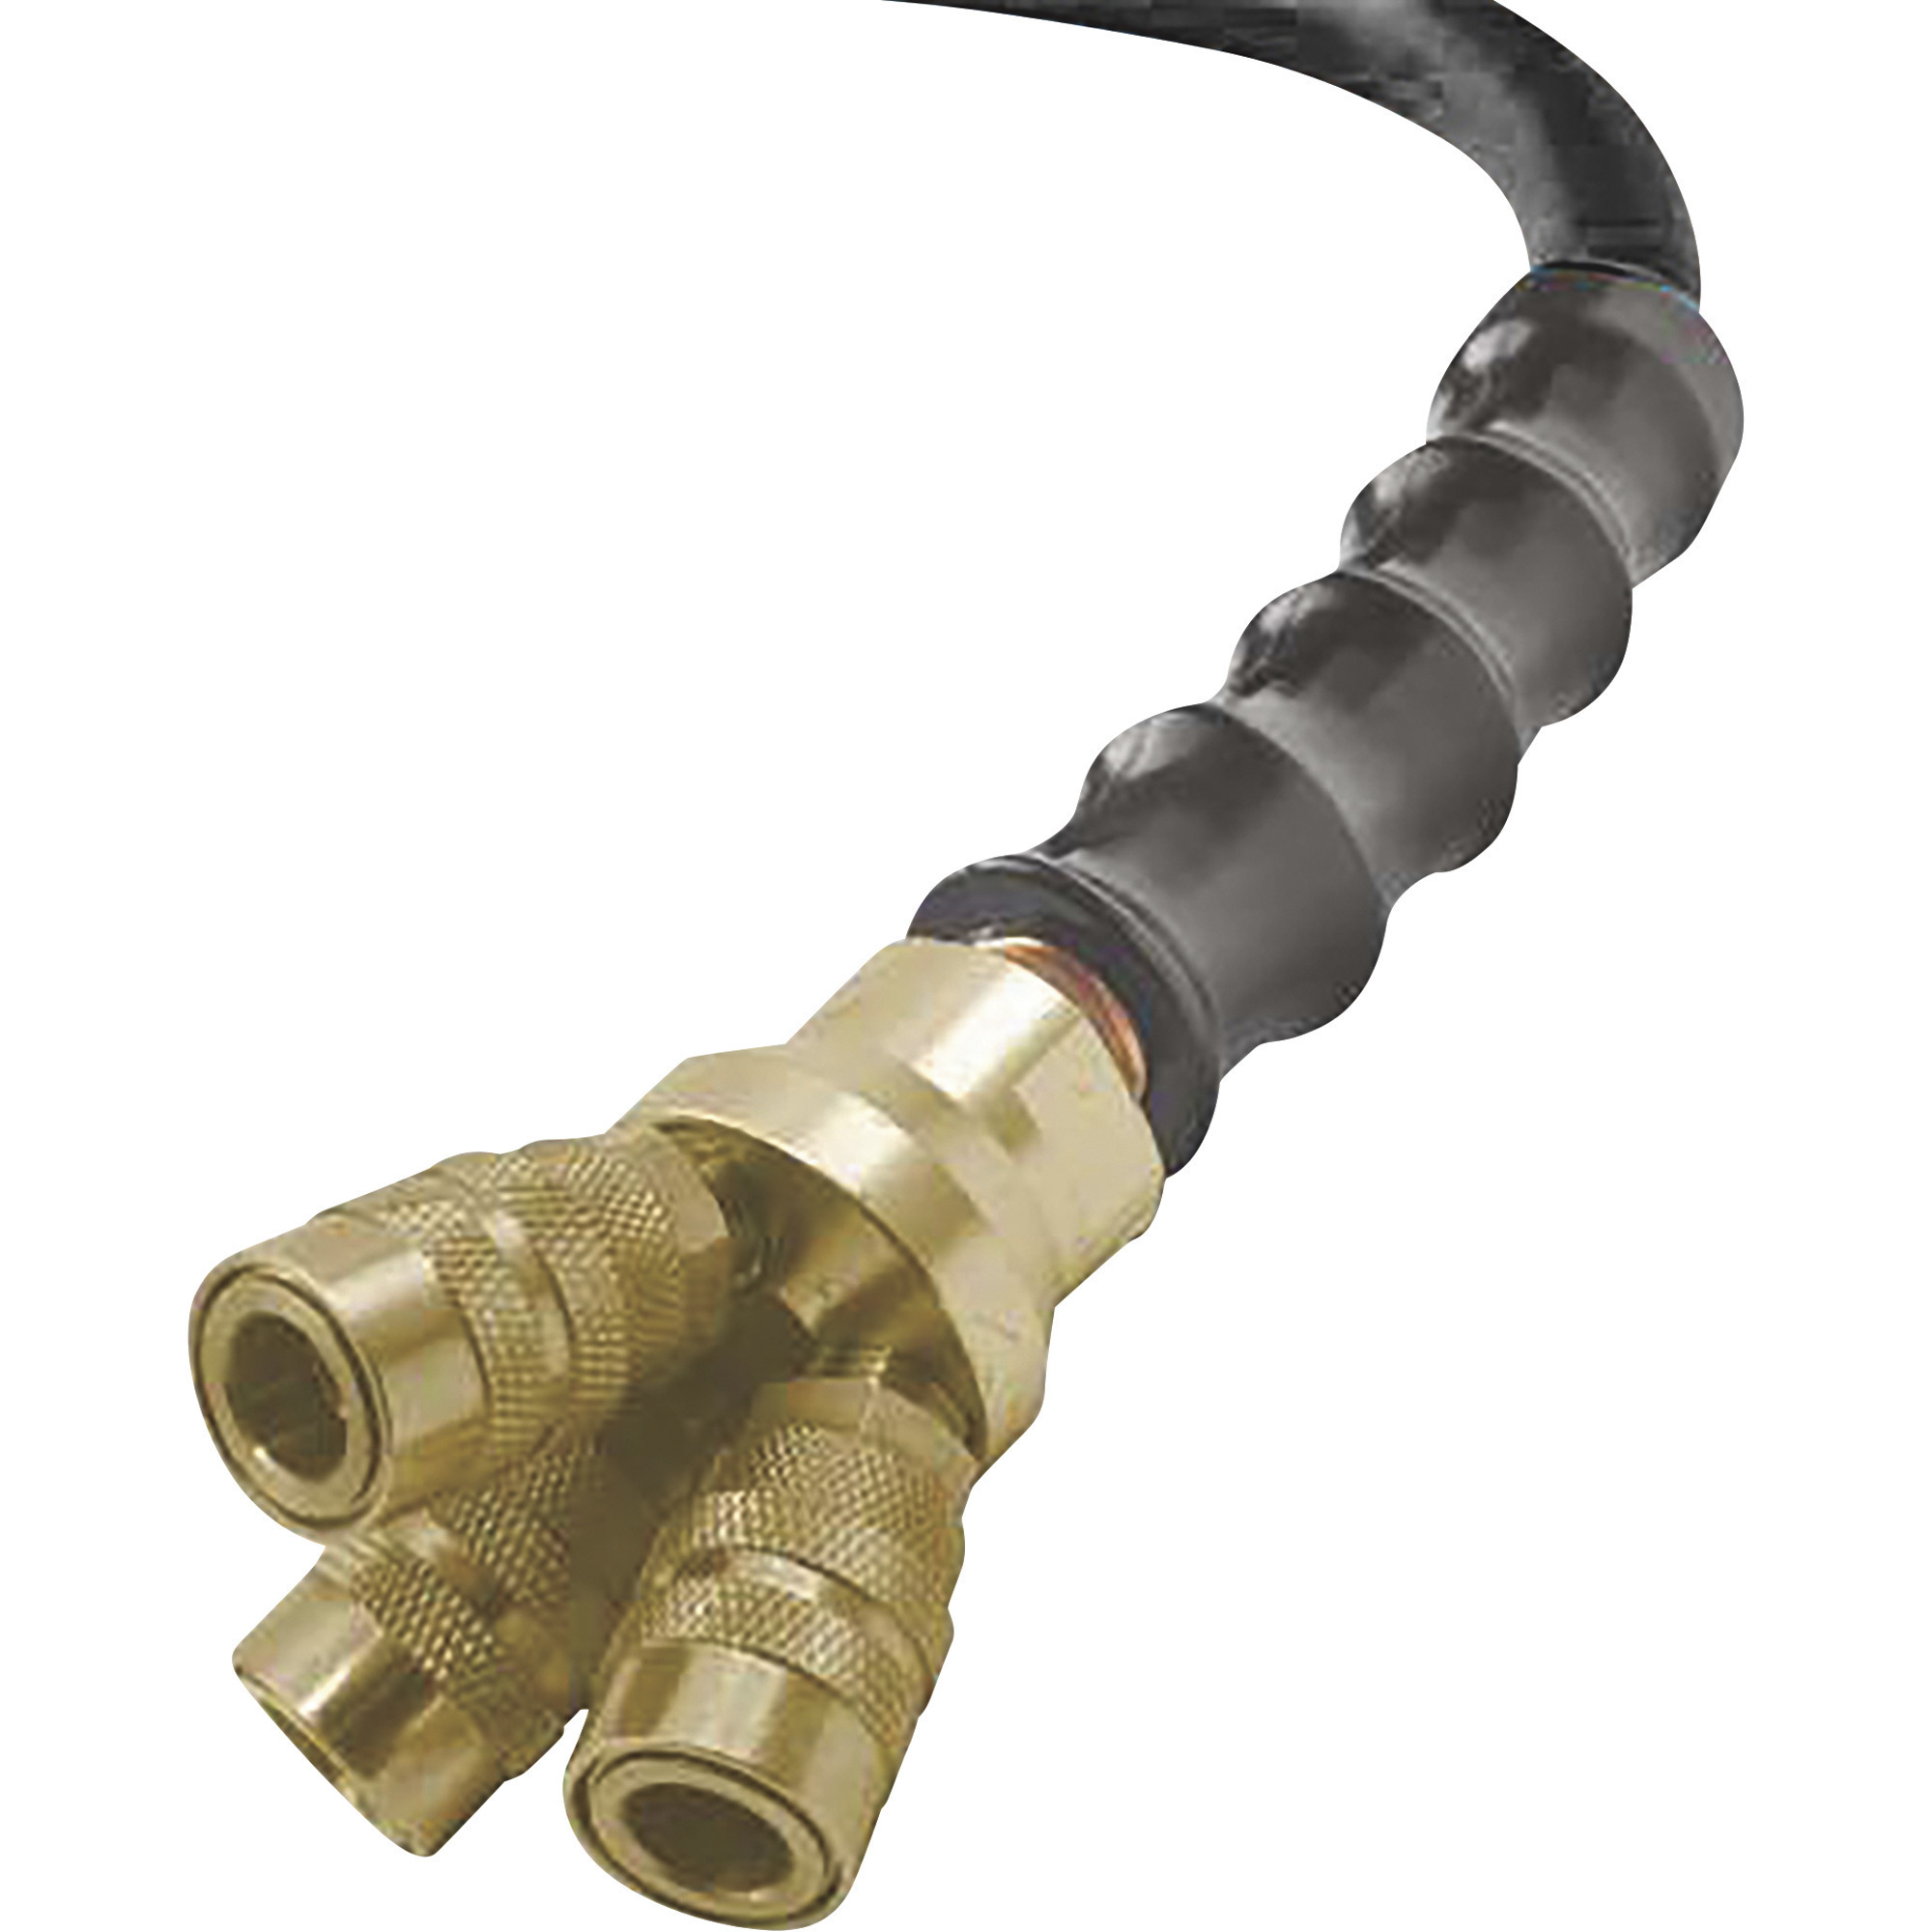 Klutch Professional Lead-in/Whip Hose with 3-Way Coupler, 3/8Inch x 3ft., 300 PSI, Model TLEX3803-3W-NT